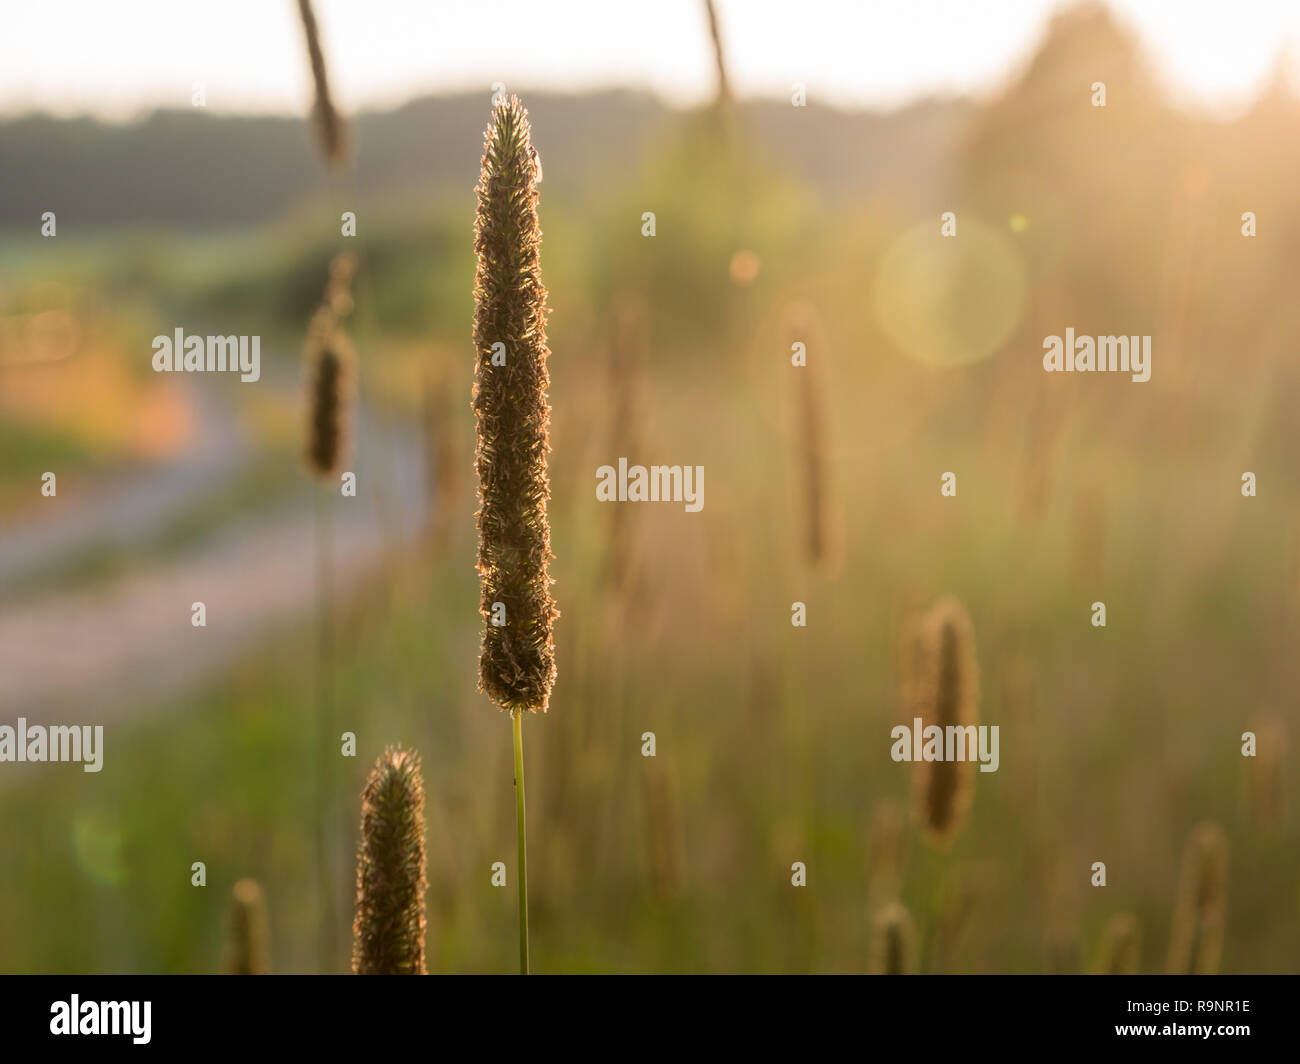 Timothy-grass spikes in evening light by a countryside road. Stock Photo